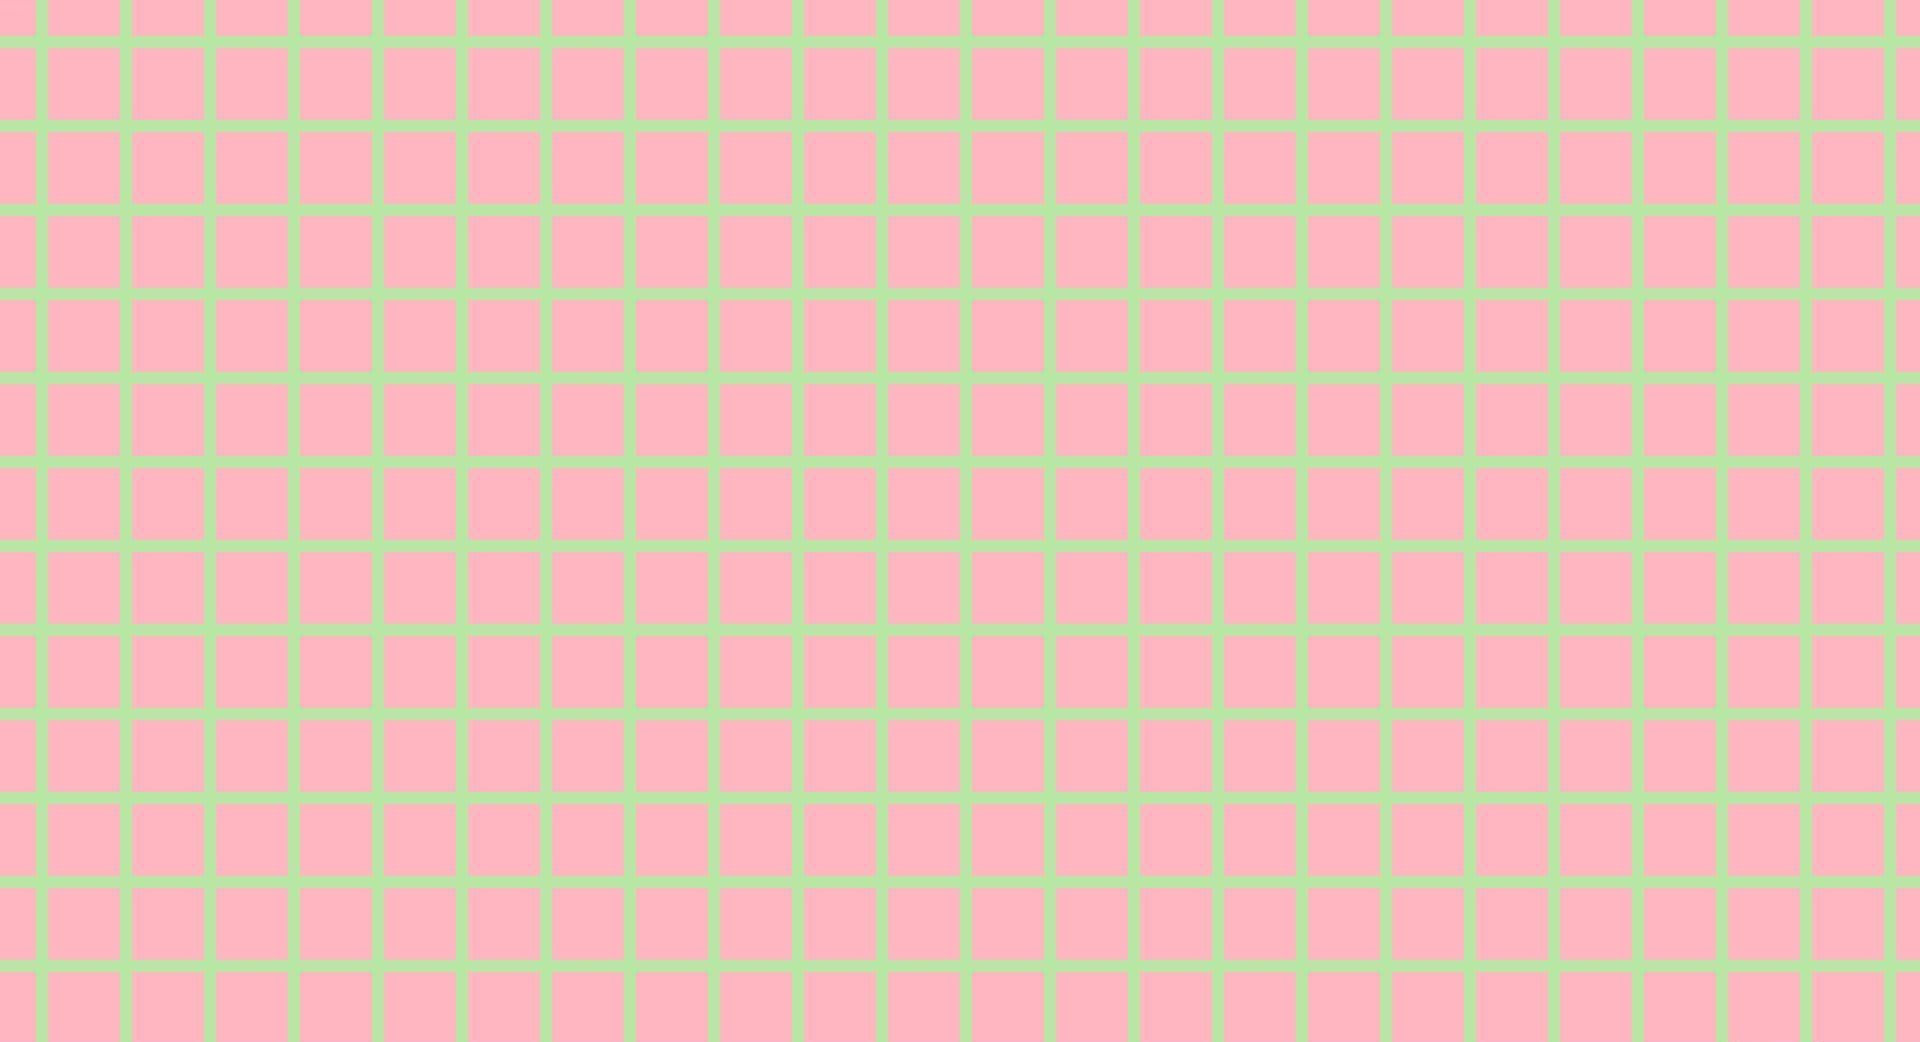 A grid of light green lines on a pink background - Soft pink, light pink